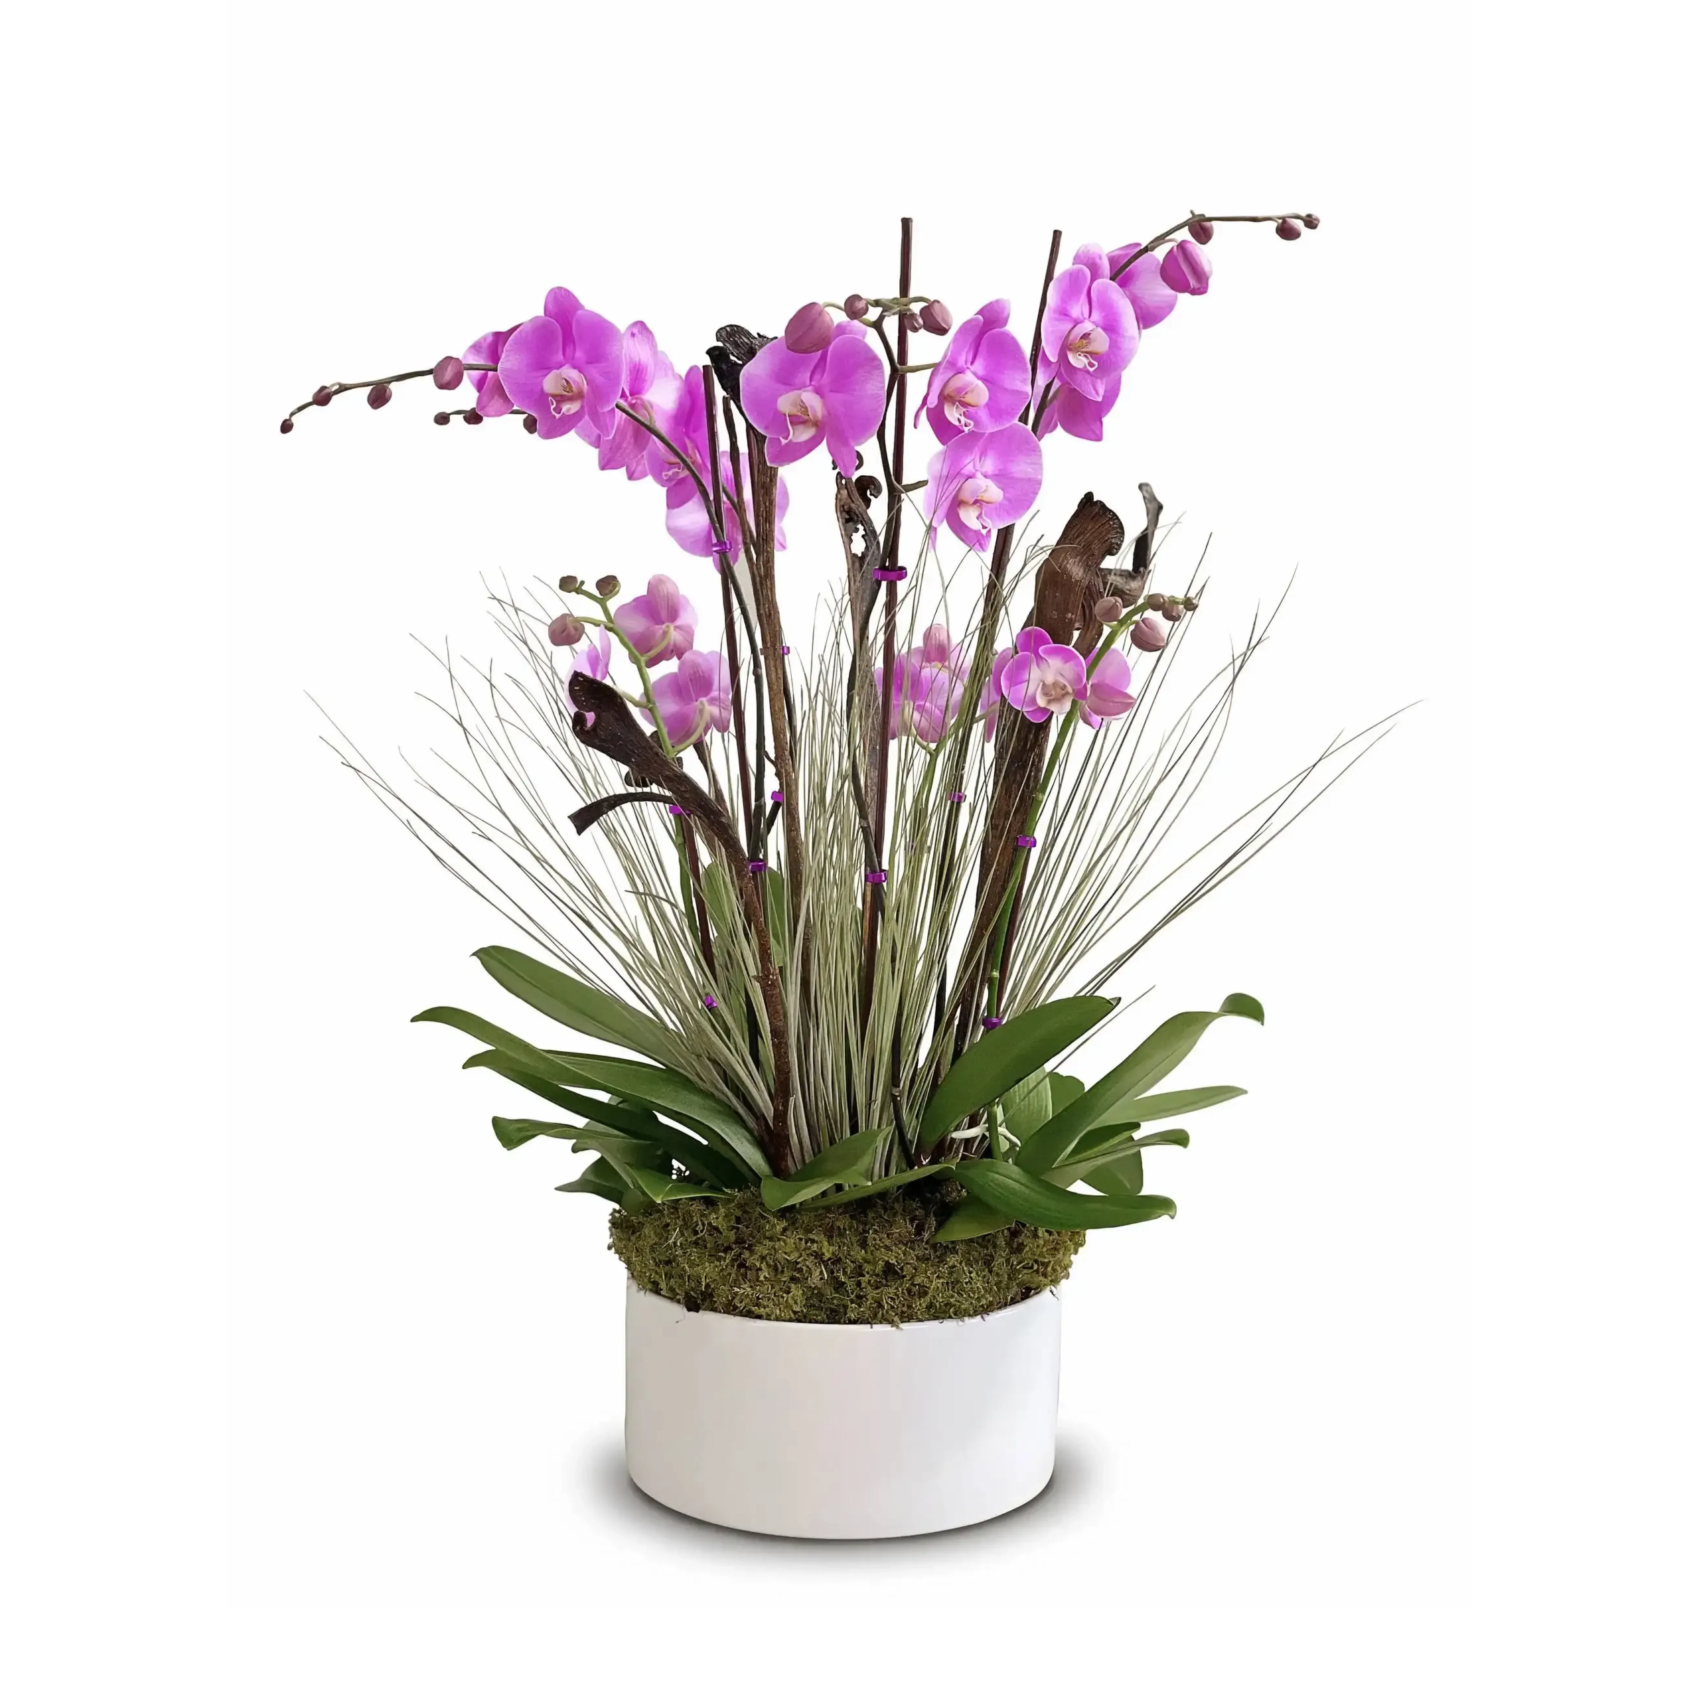 chrliz 1 scaled Charliz: Pink Orchid Arrangement with Air Plants and Decorative Branches